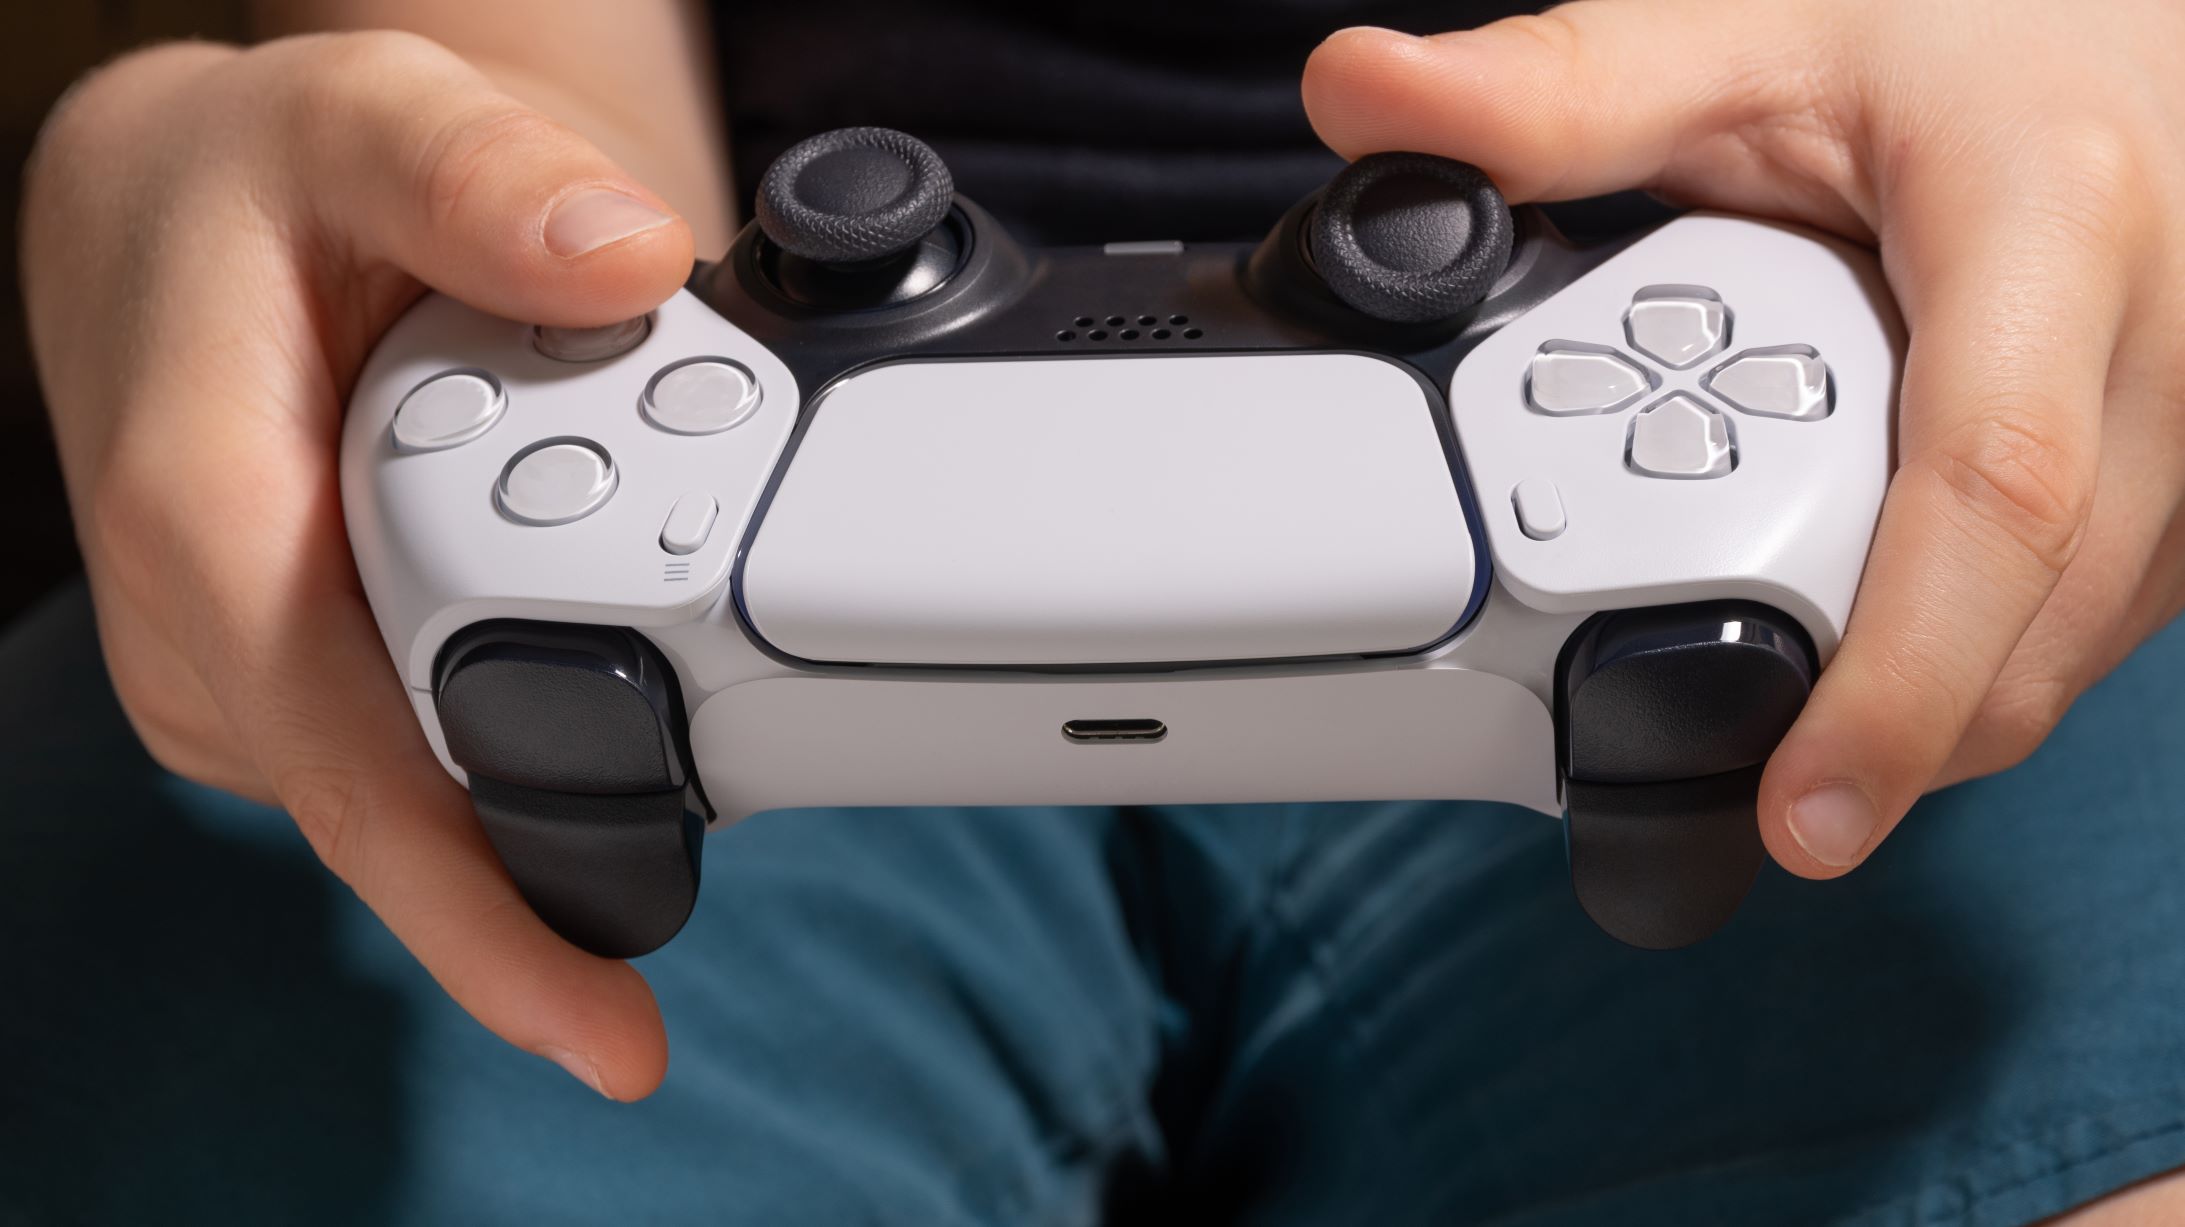 Steam: How To Disable Game Controller Support